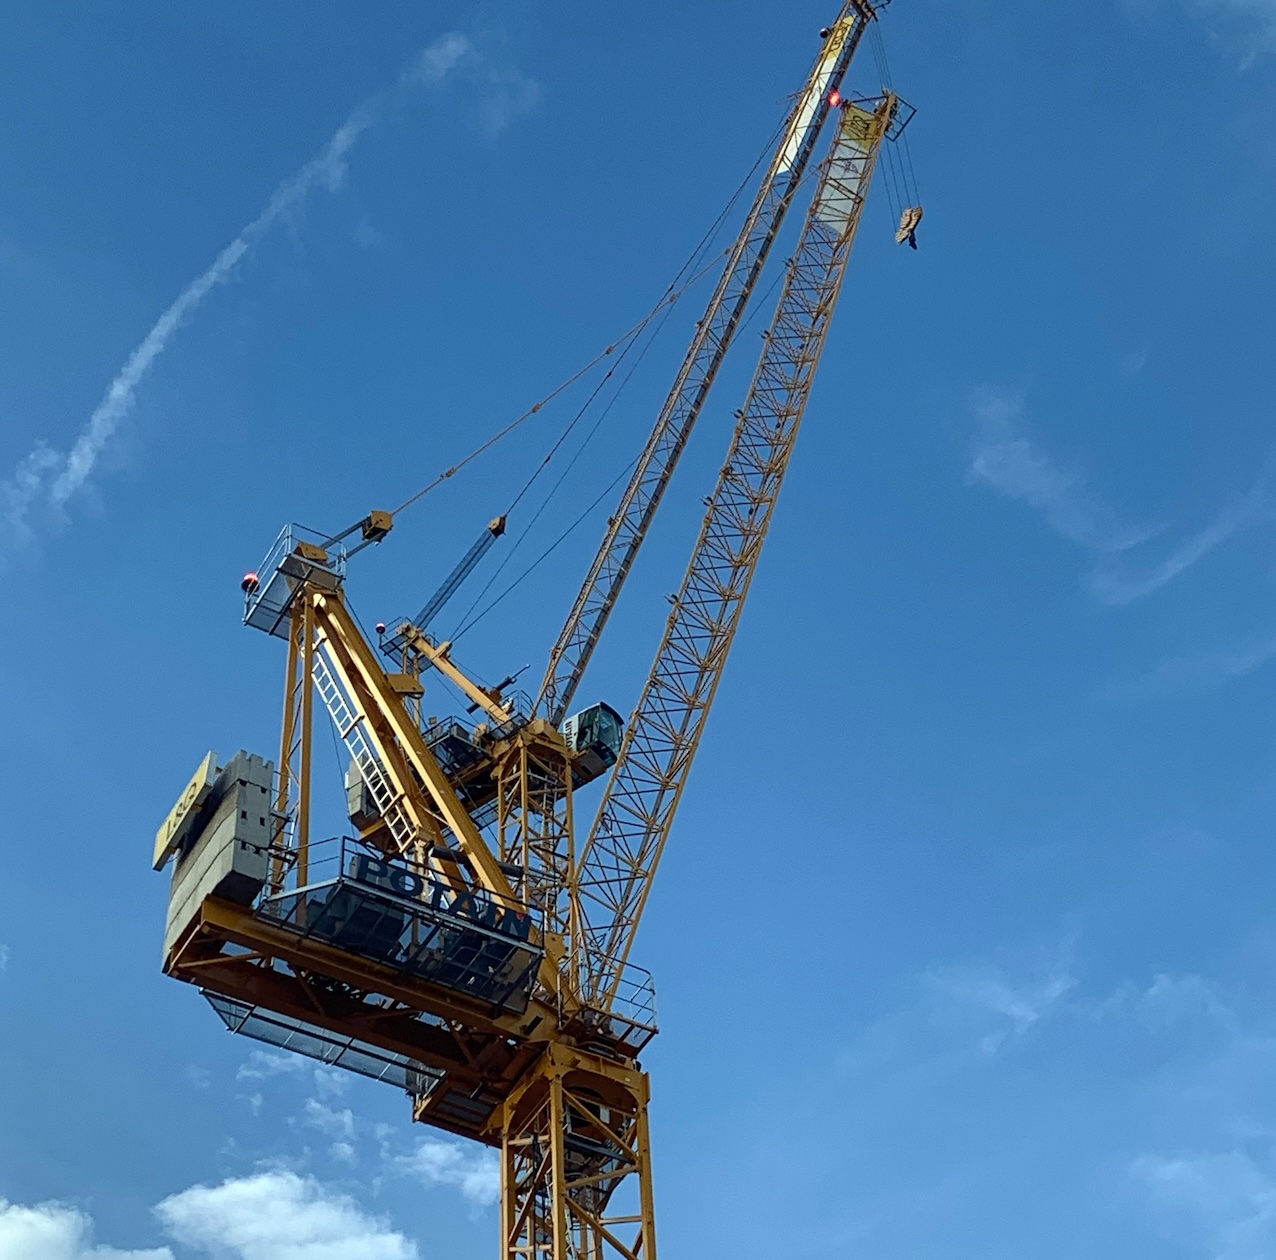 In London, the world's first ever site for the MR229 tower crane